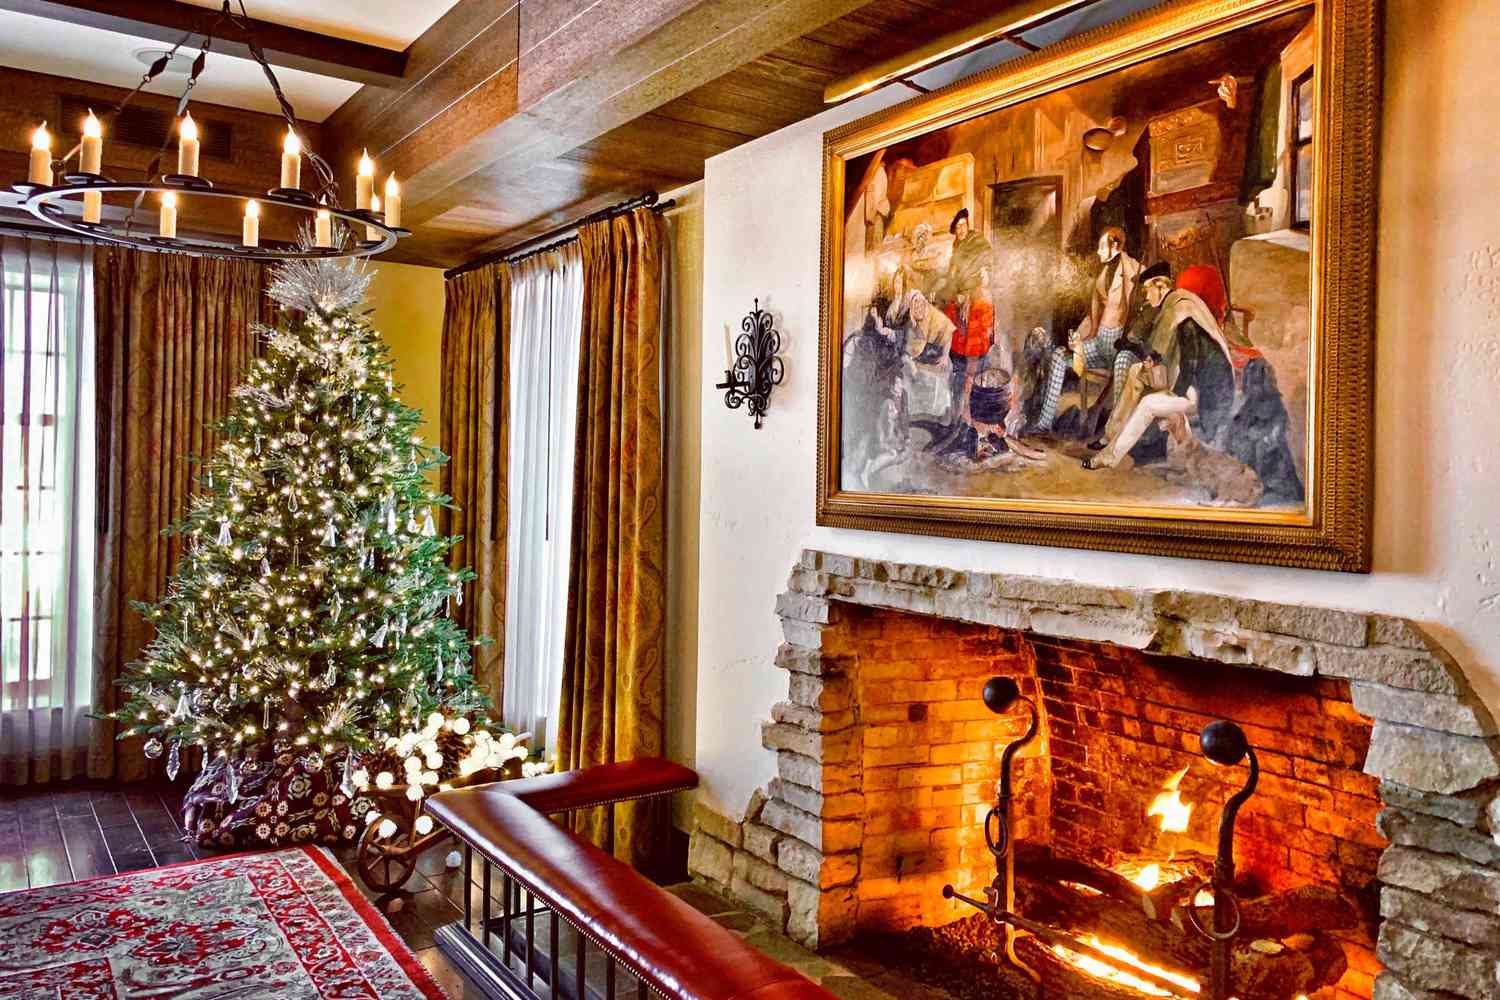 Hotel interior lobby with fireplace and Christmas tree